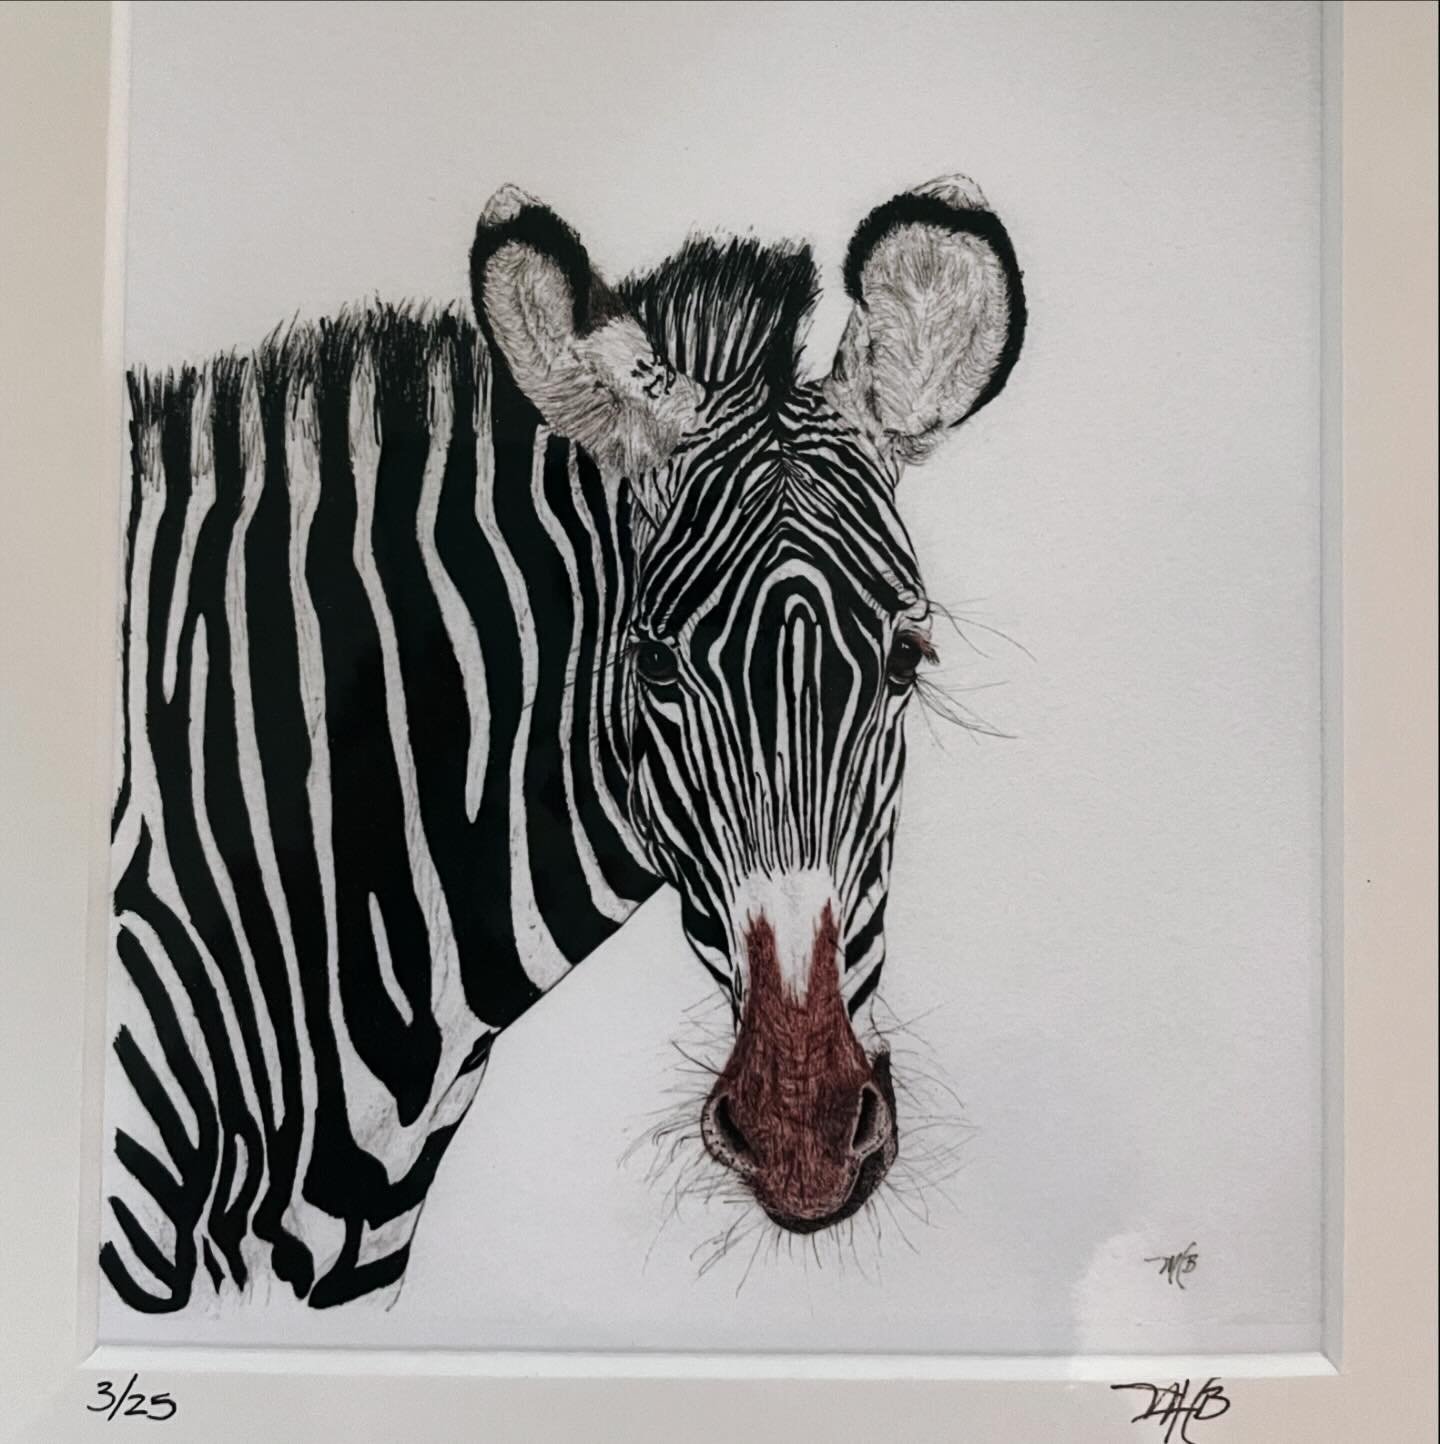 It arrived! Beyond thrilled to now own this print by the talented @maureenc.berry . Zebras play a critical role in my forthcoming book ~ and this is such a beautiful and meaningful rendering. Thank you Maureen! 💜🦓